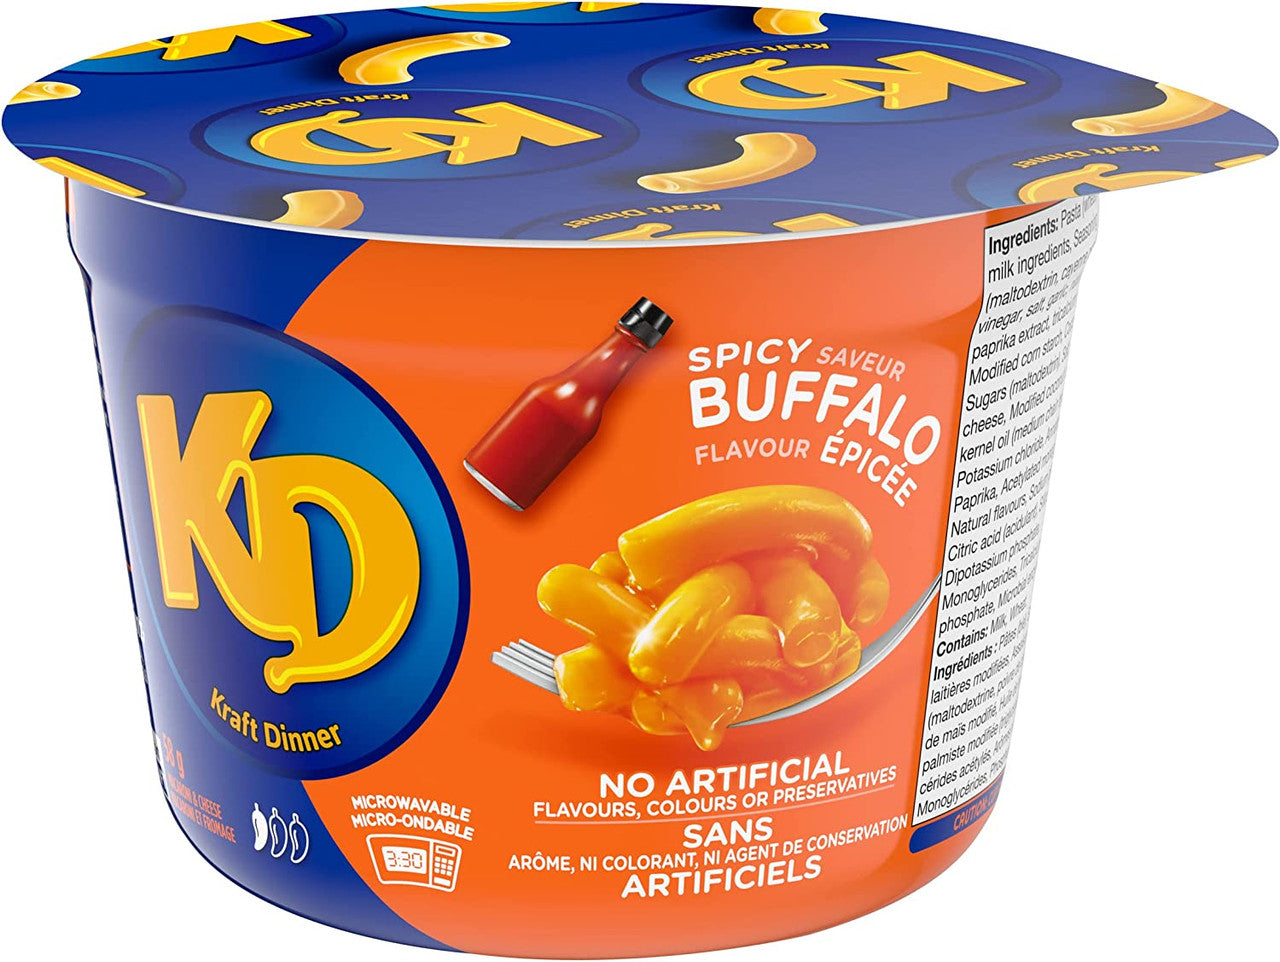 KD Kraft Dinner Spicy Buffalo Flavor Snack Cups, 58g/2 oz. 1 Cup (Imported from Canada)